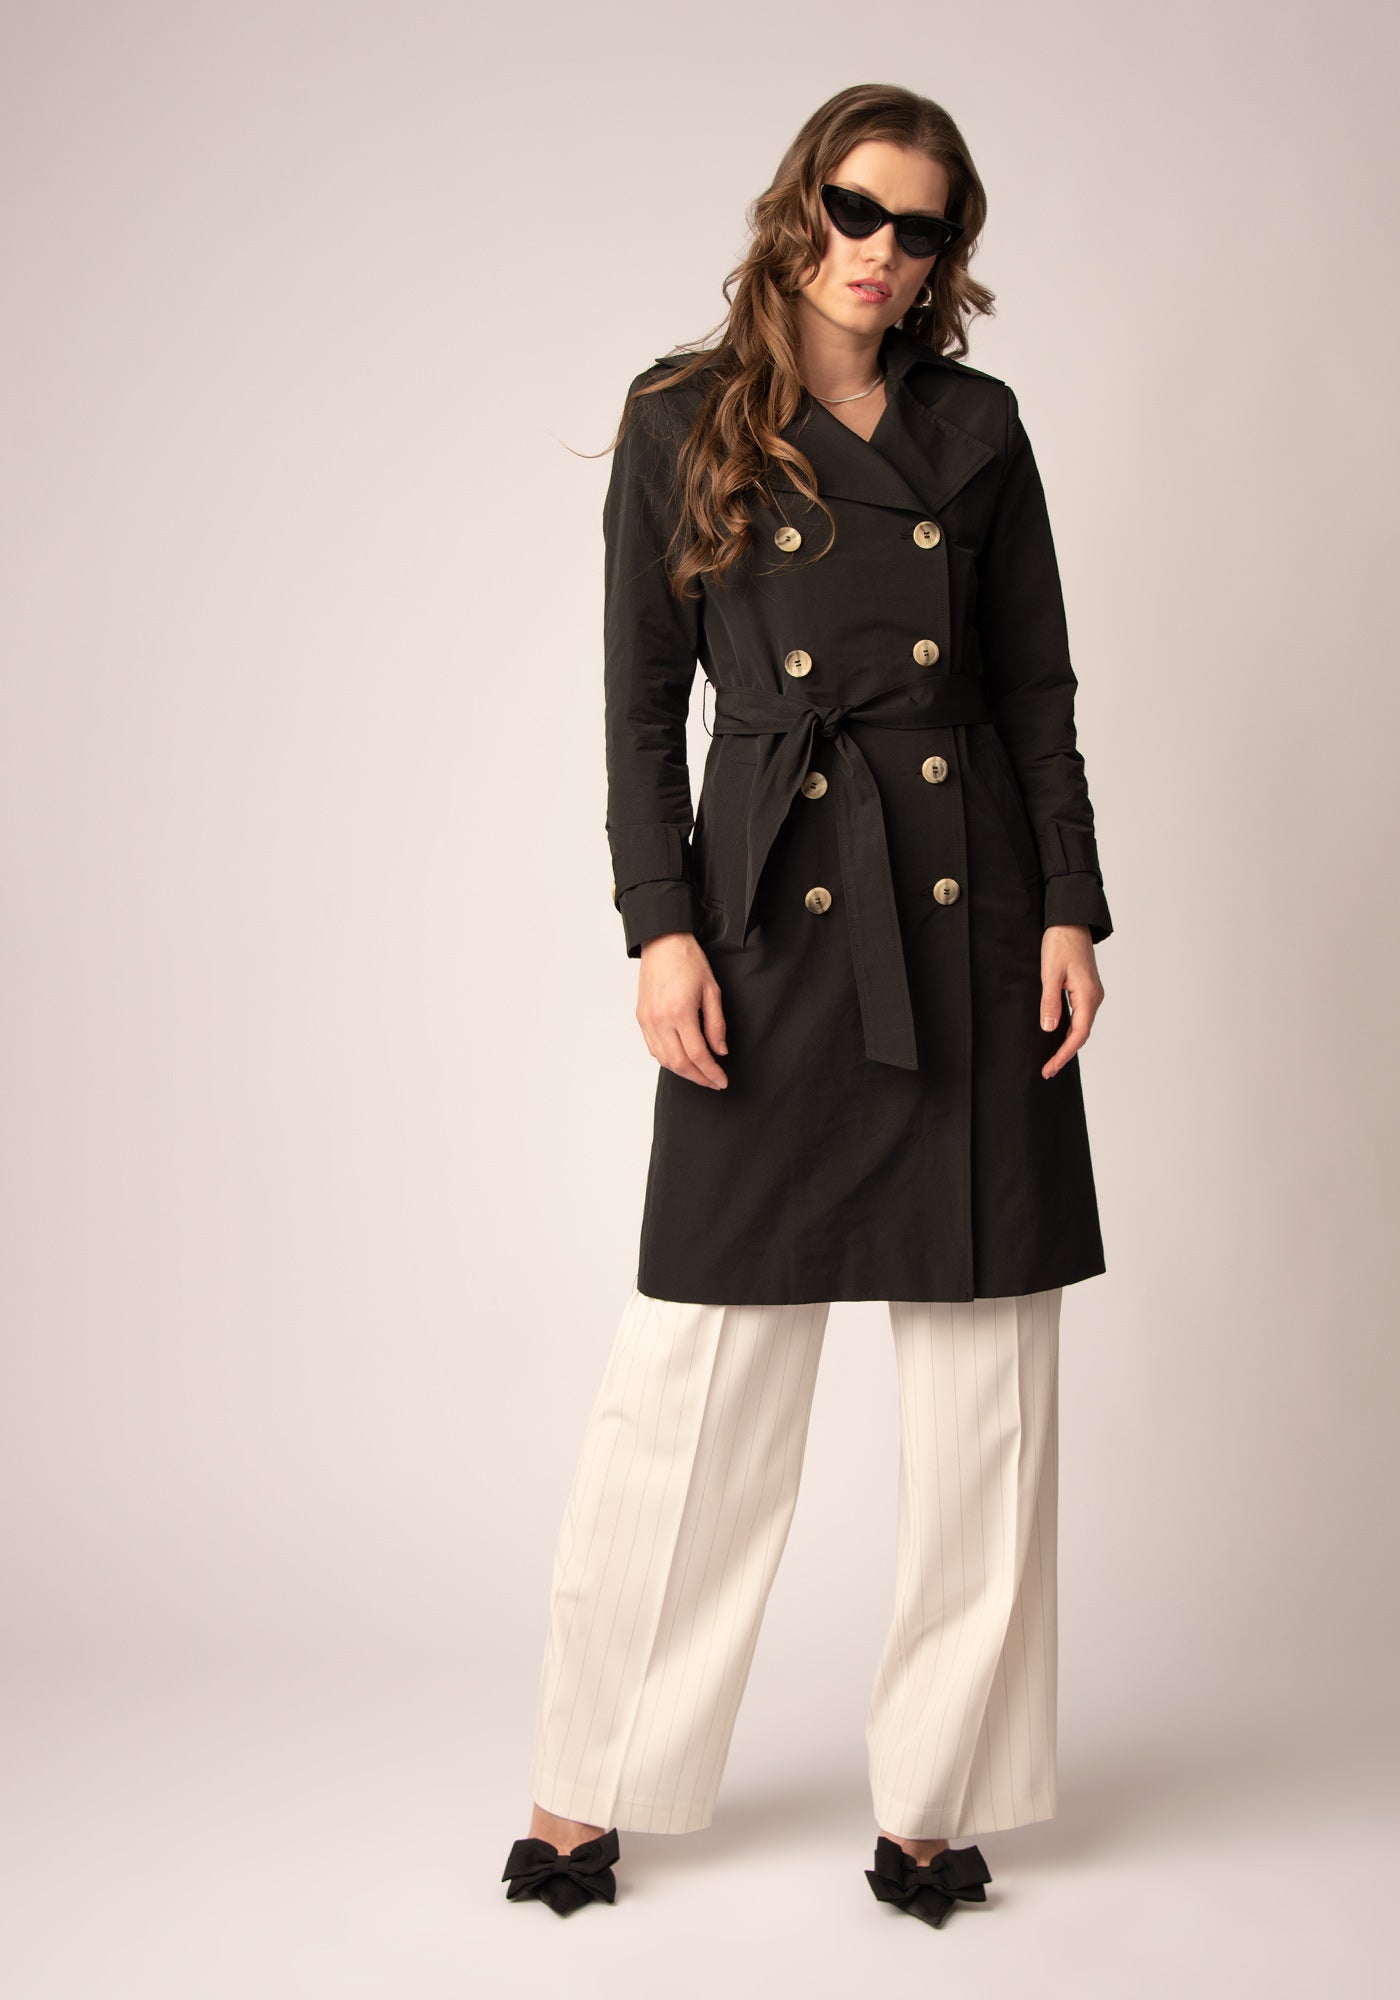 Women's Tailored Double breasted Trench coat in Black